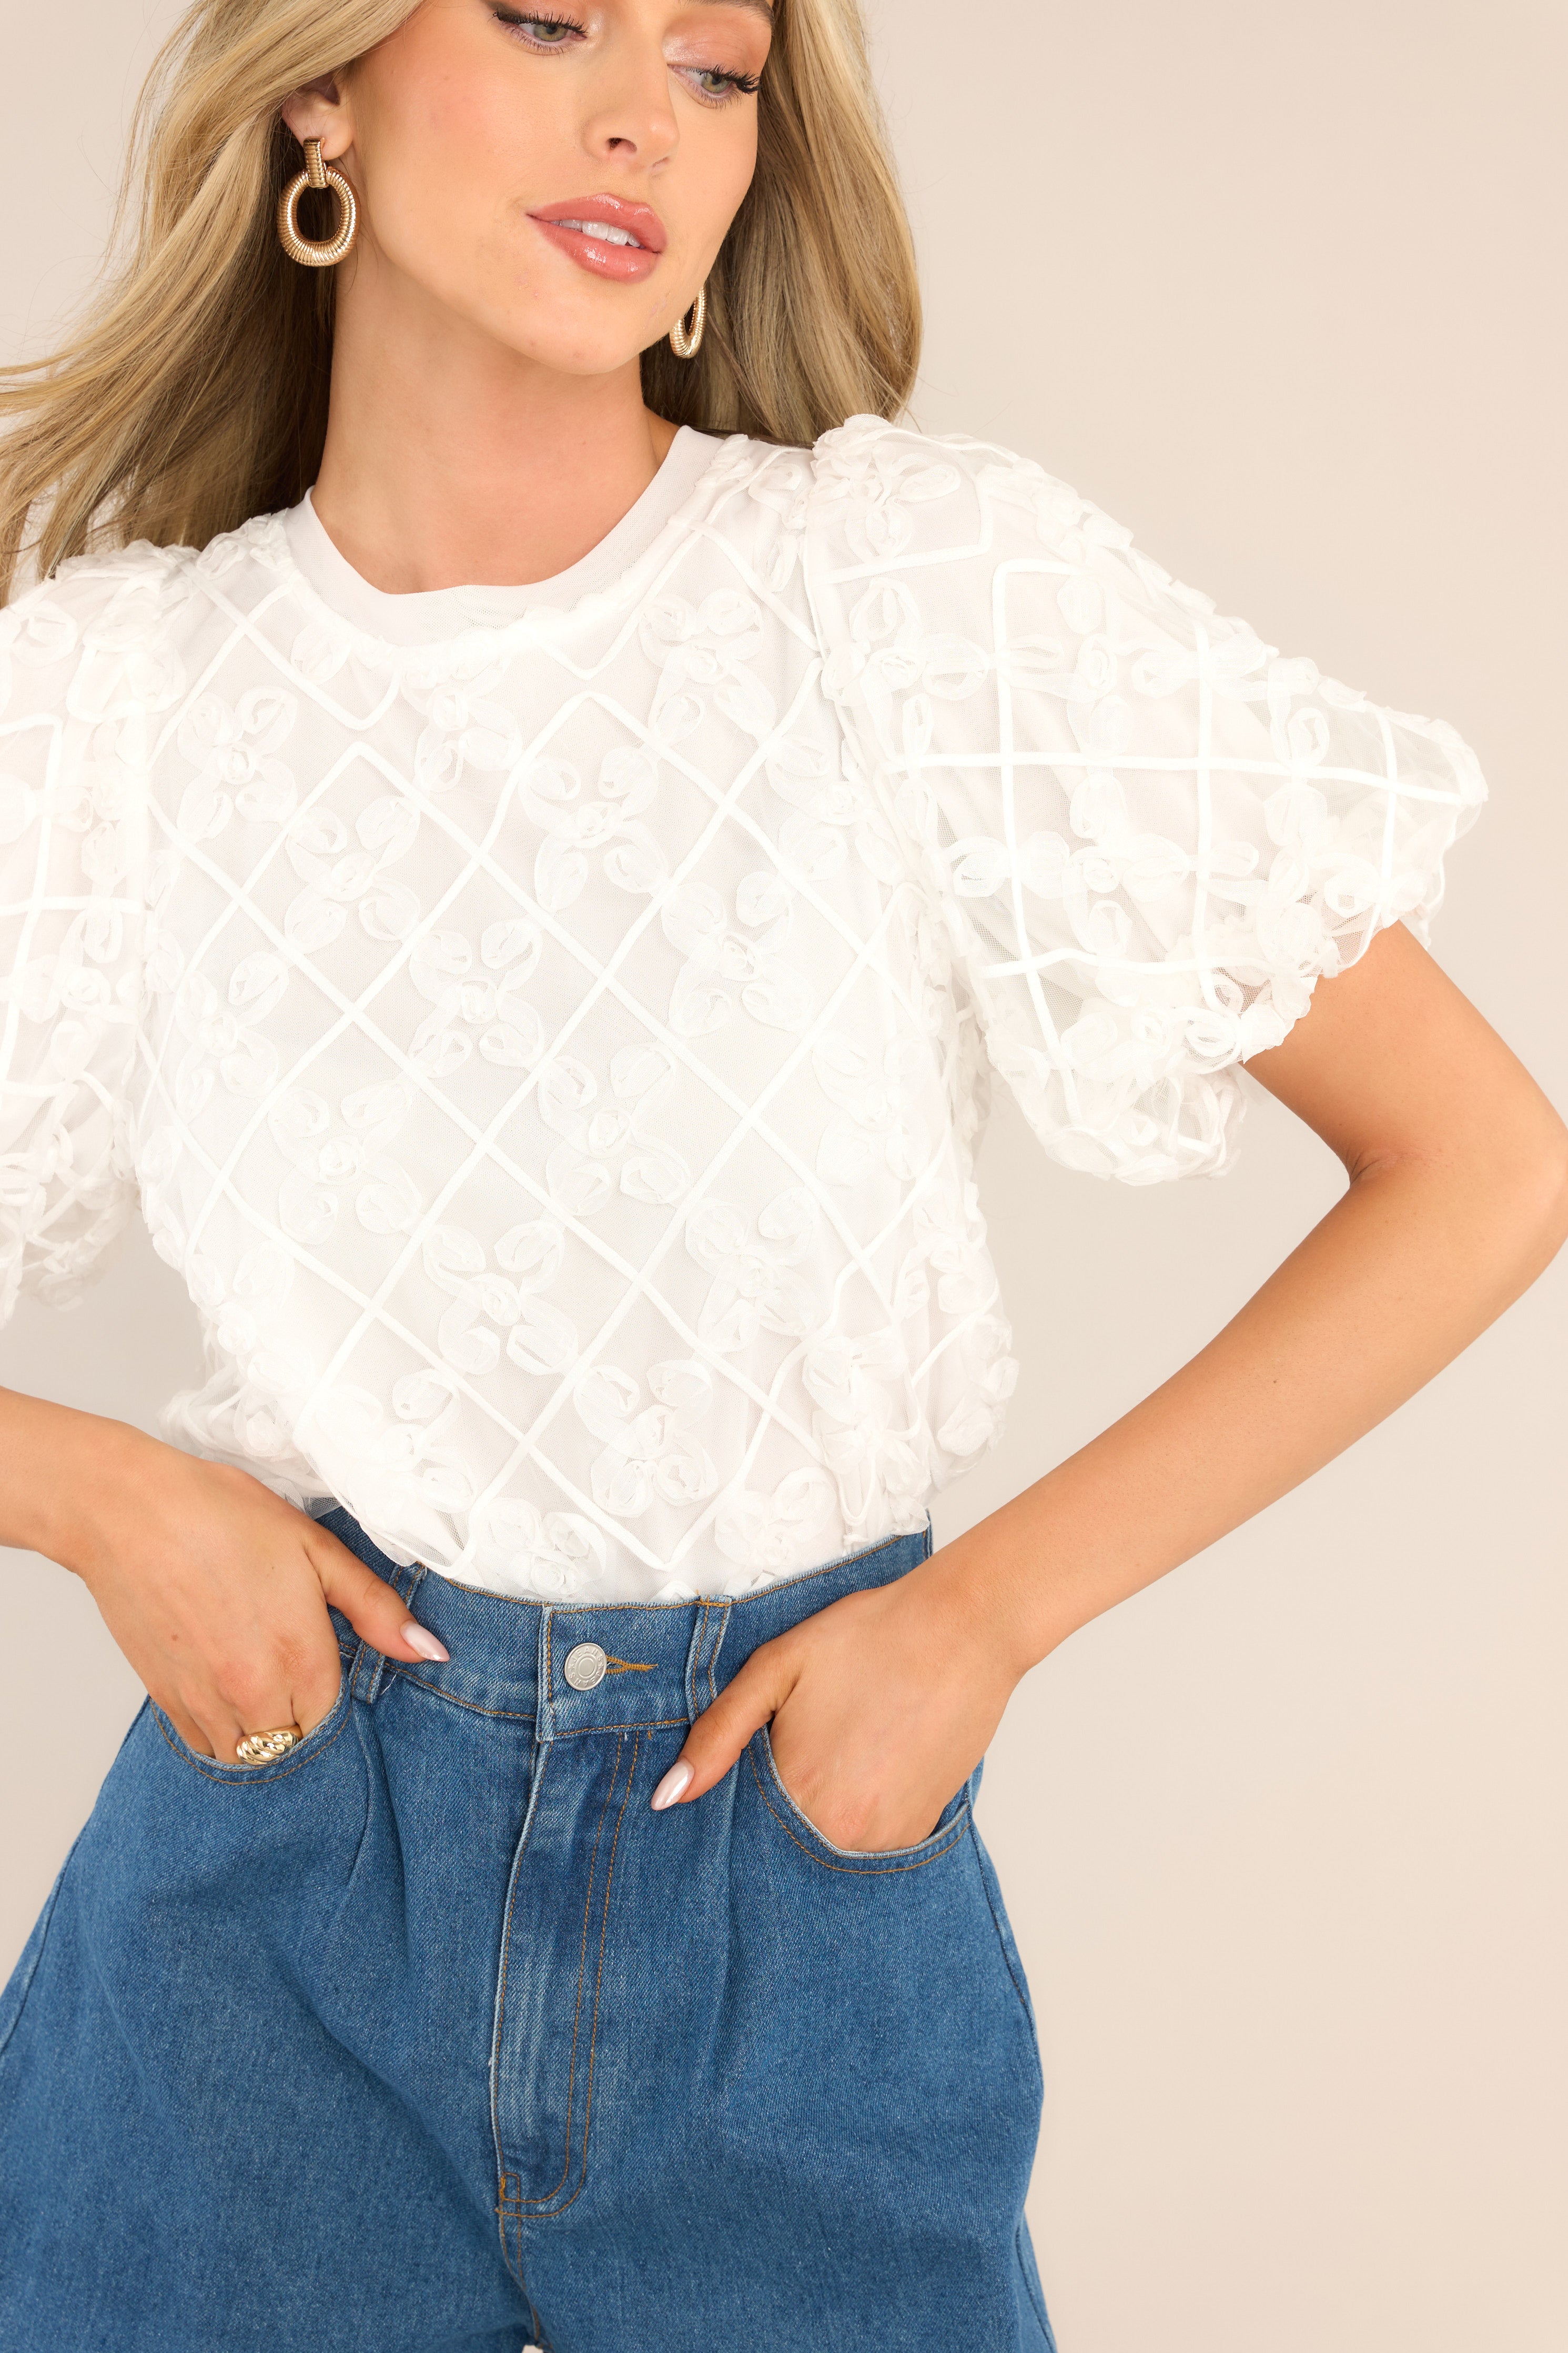 Whispering Willow White Lace Blouse